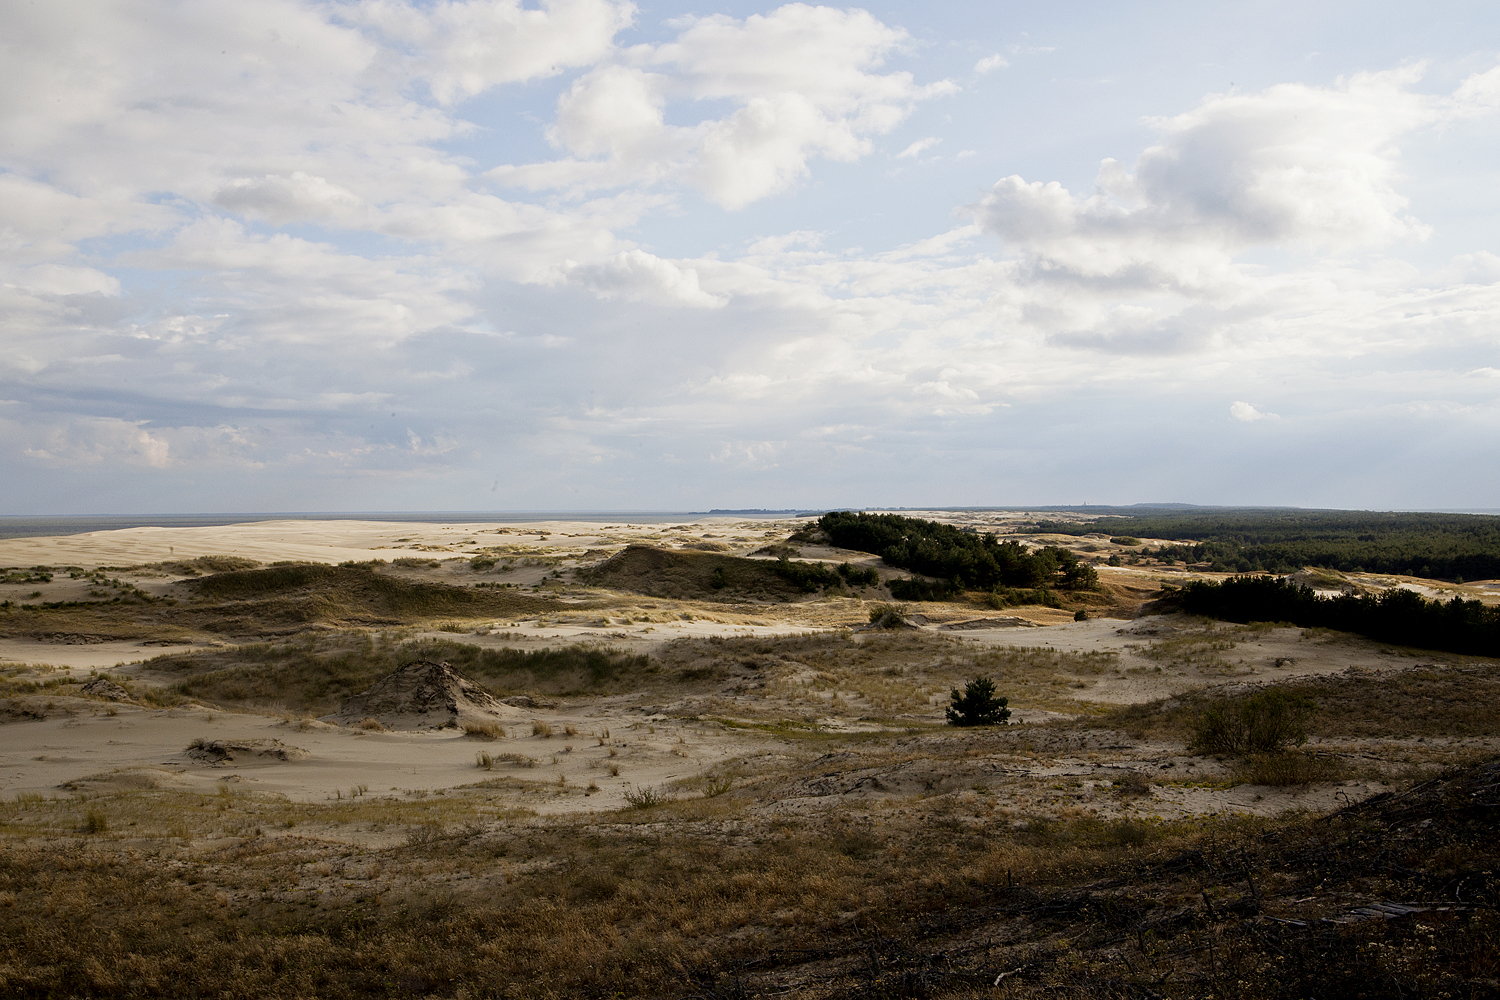 The Curonian Spit is a nearly 100-kilometer long curved sand-dune spit separating the Curonian Lagoon from the Baltic Sea Coast. It ranges in width from 400 meters at its narrowest point to 3,800 meters at its widest.